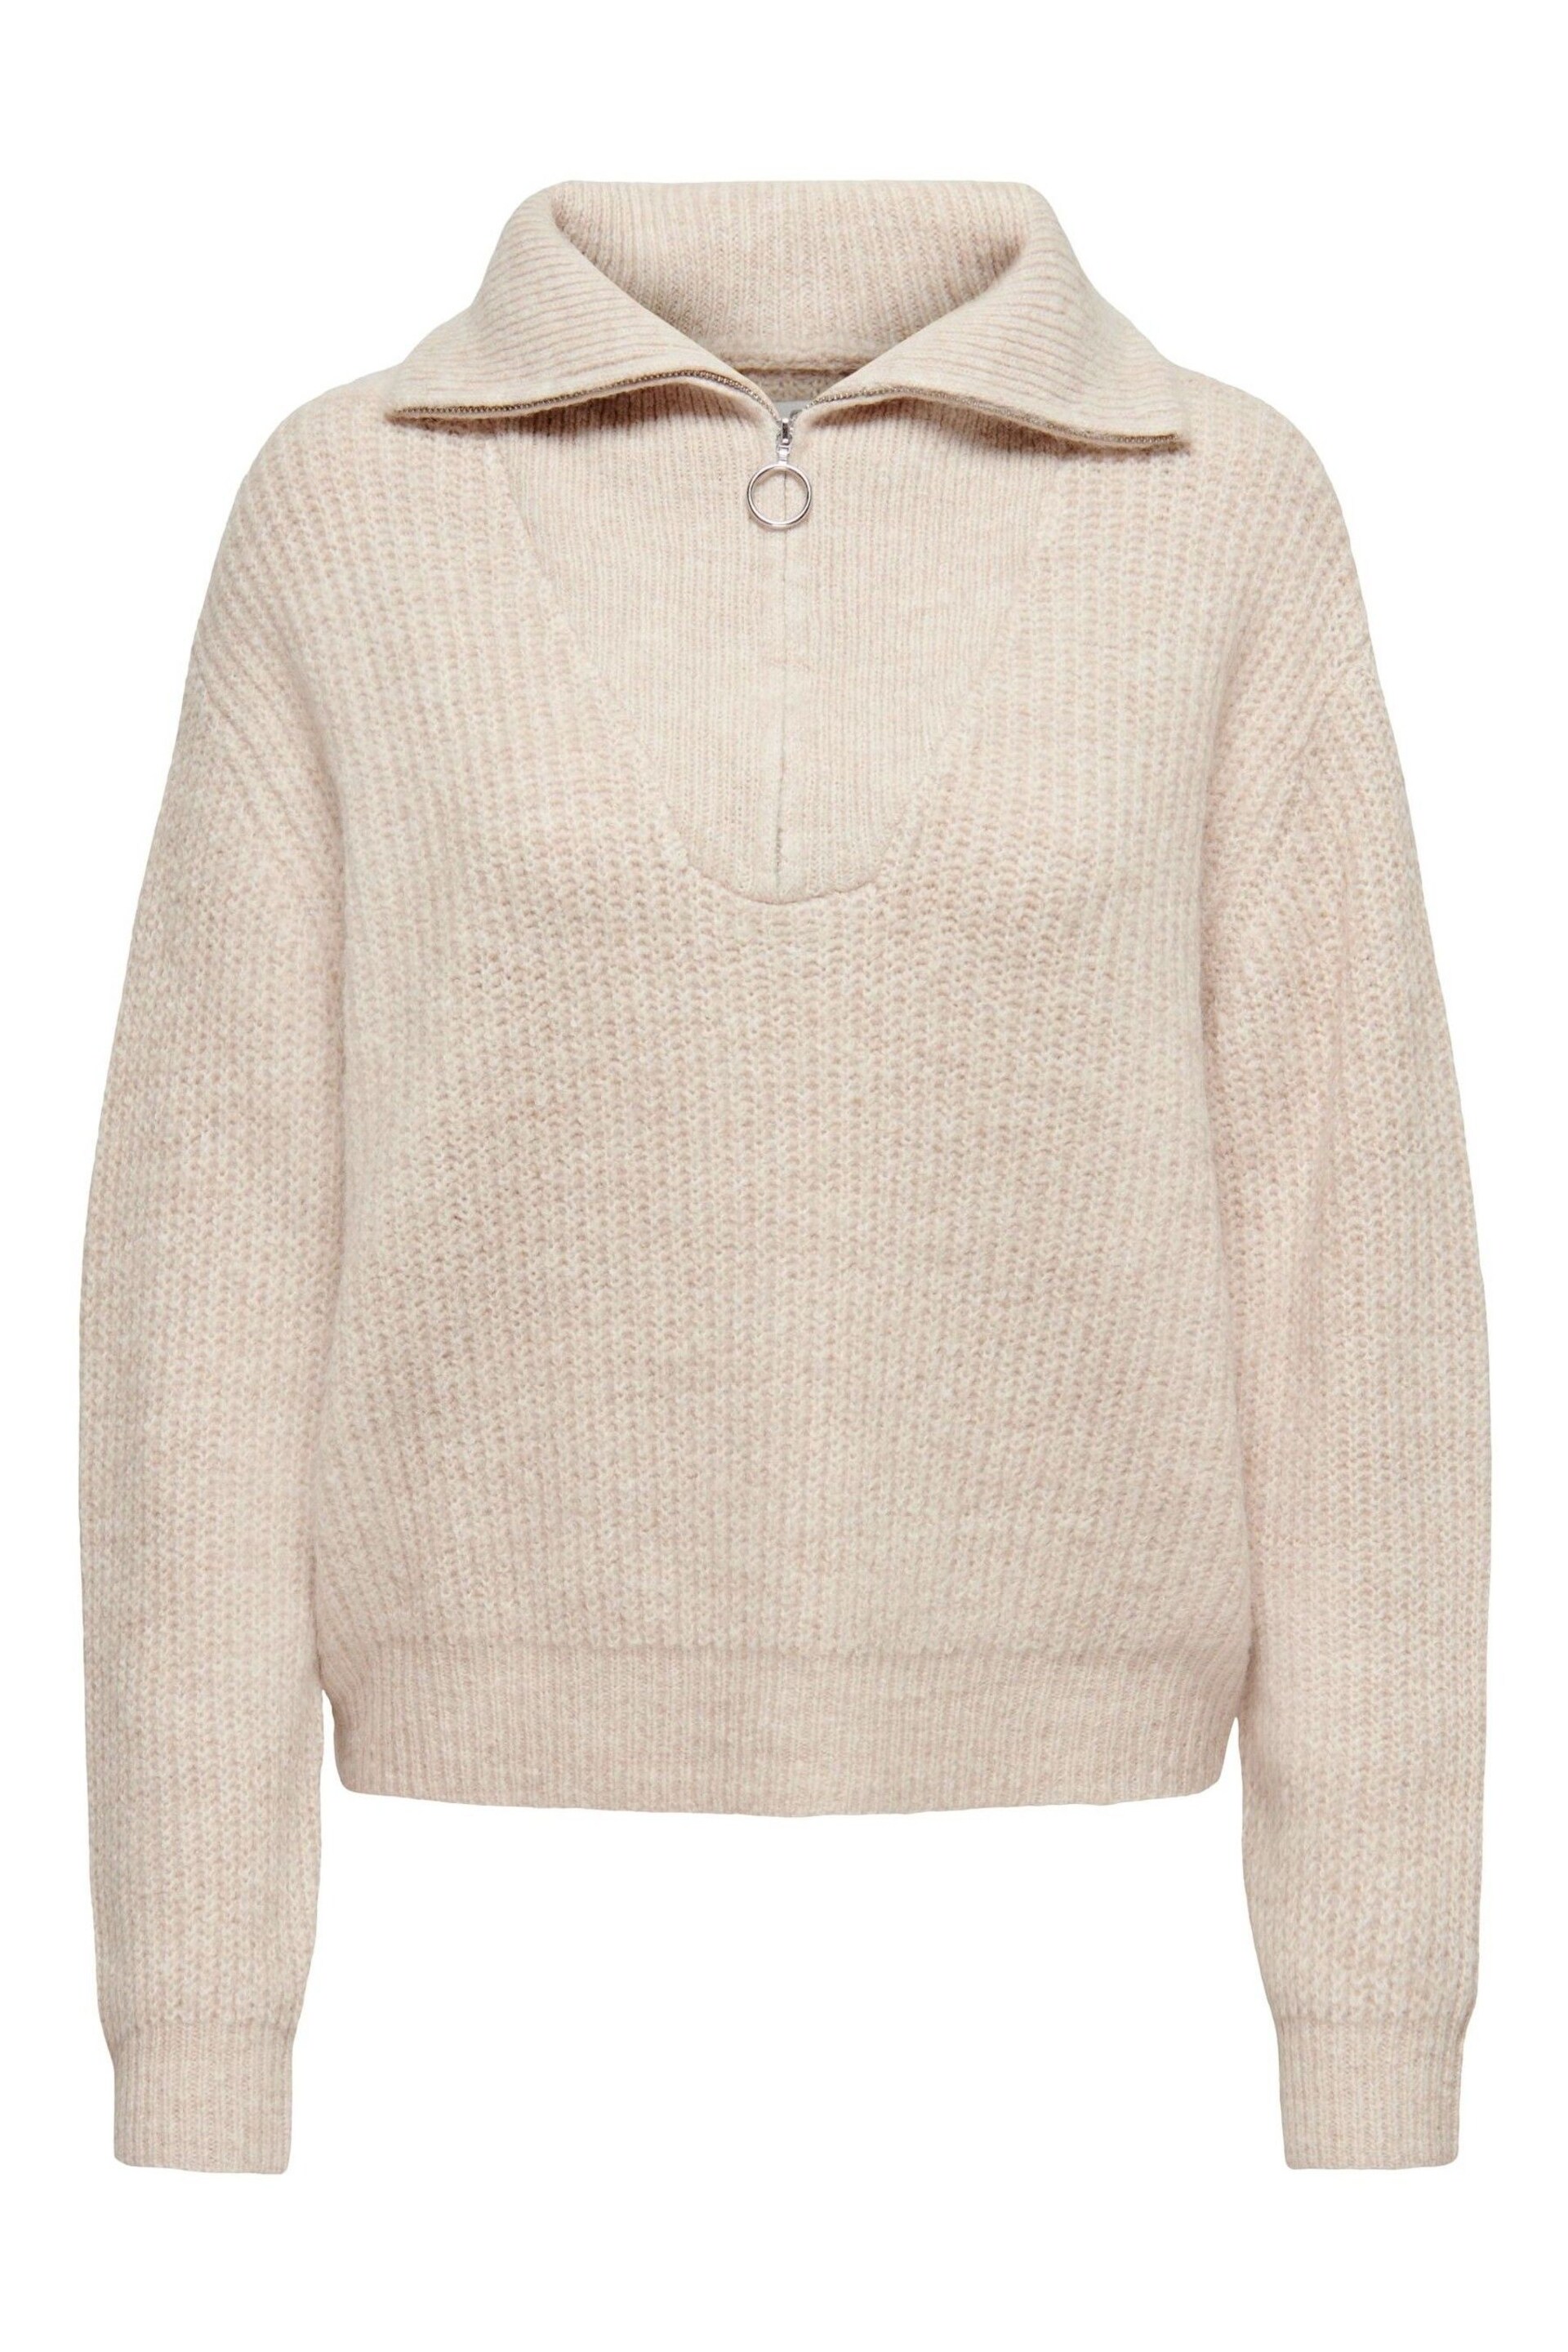 ONLY Cream Quarter Zip Knitted Jumper with Wool Blend - Image 4 of 4